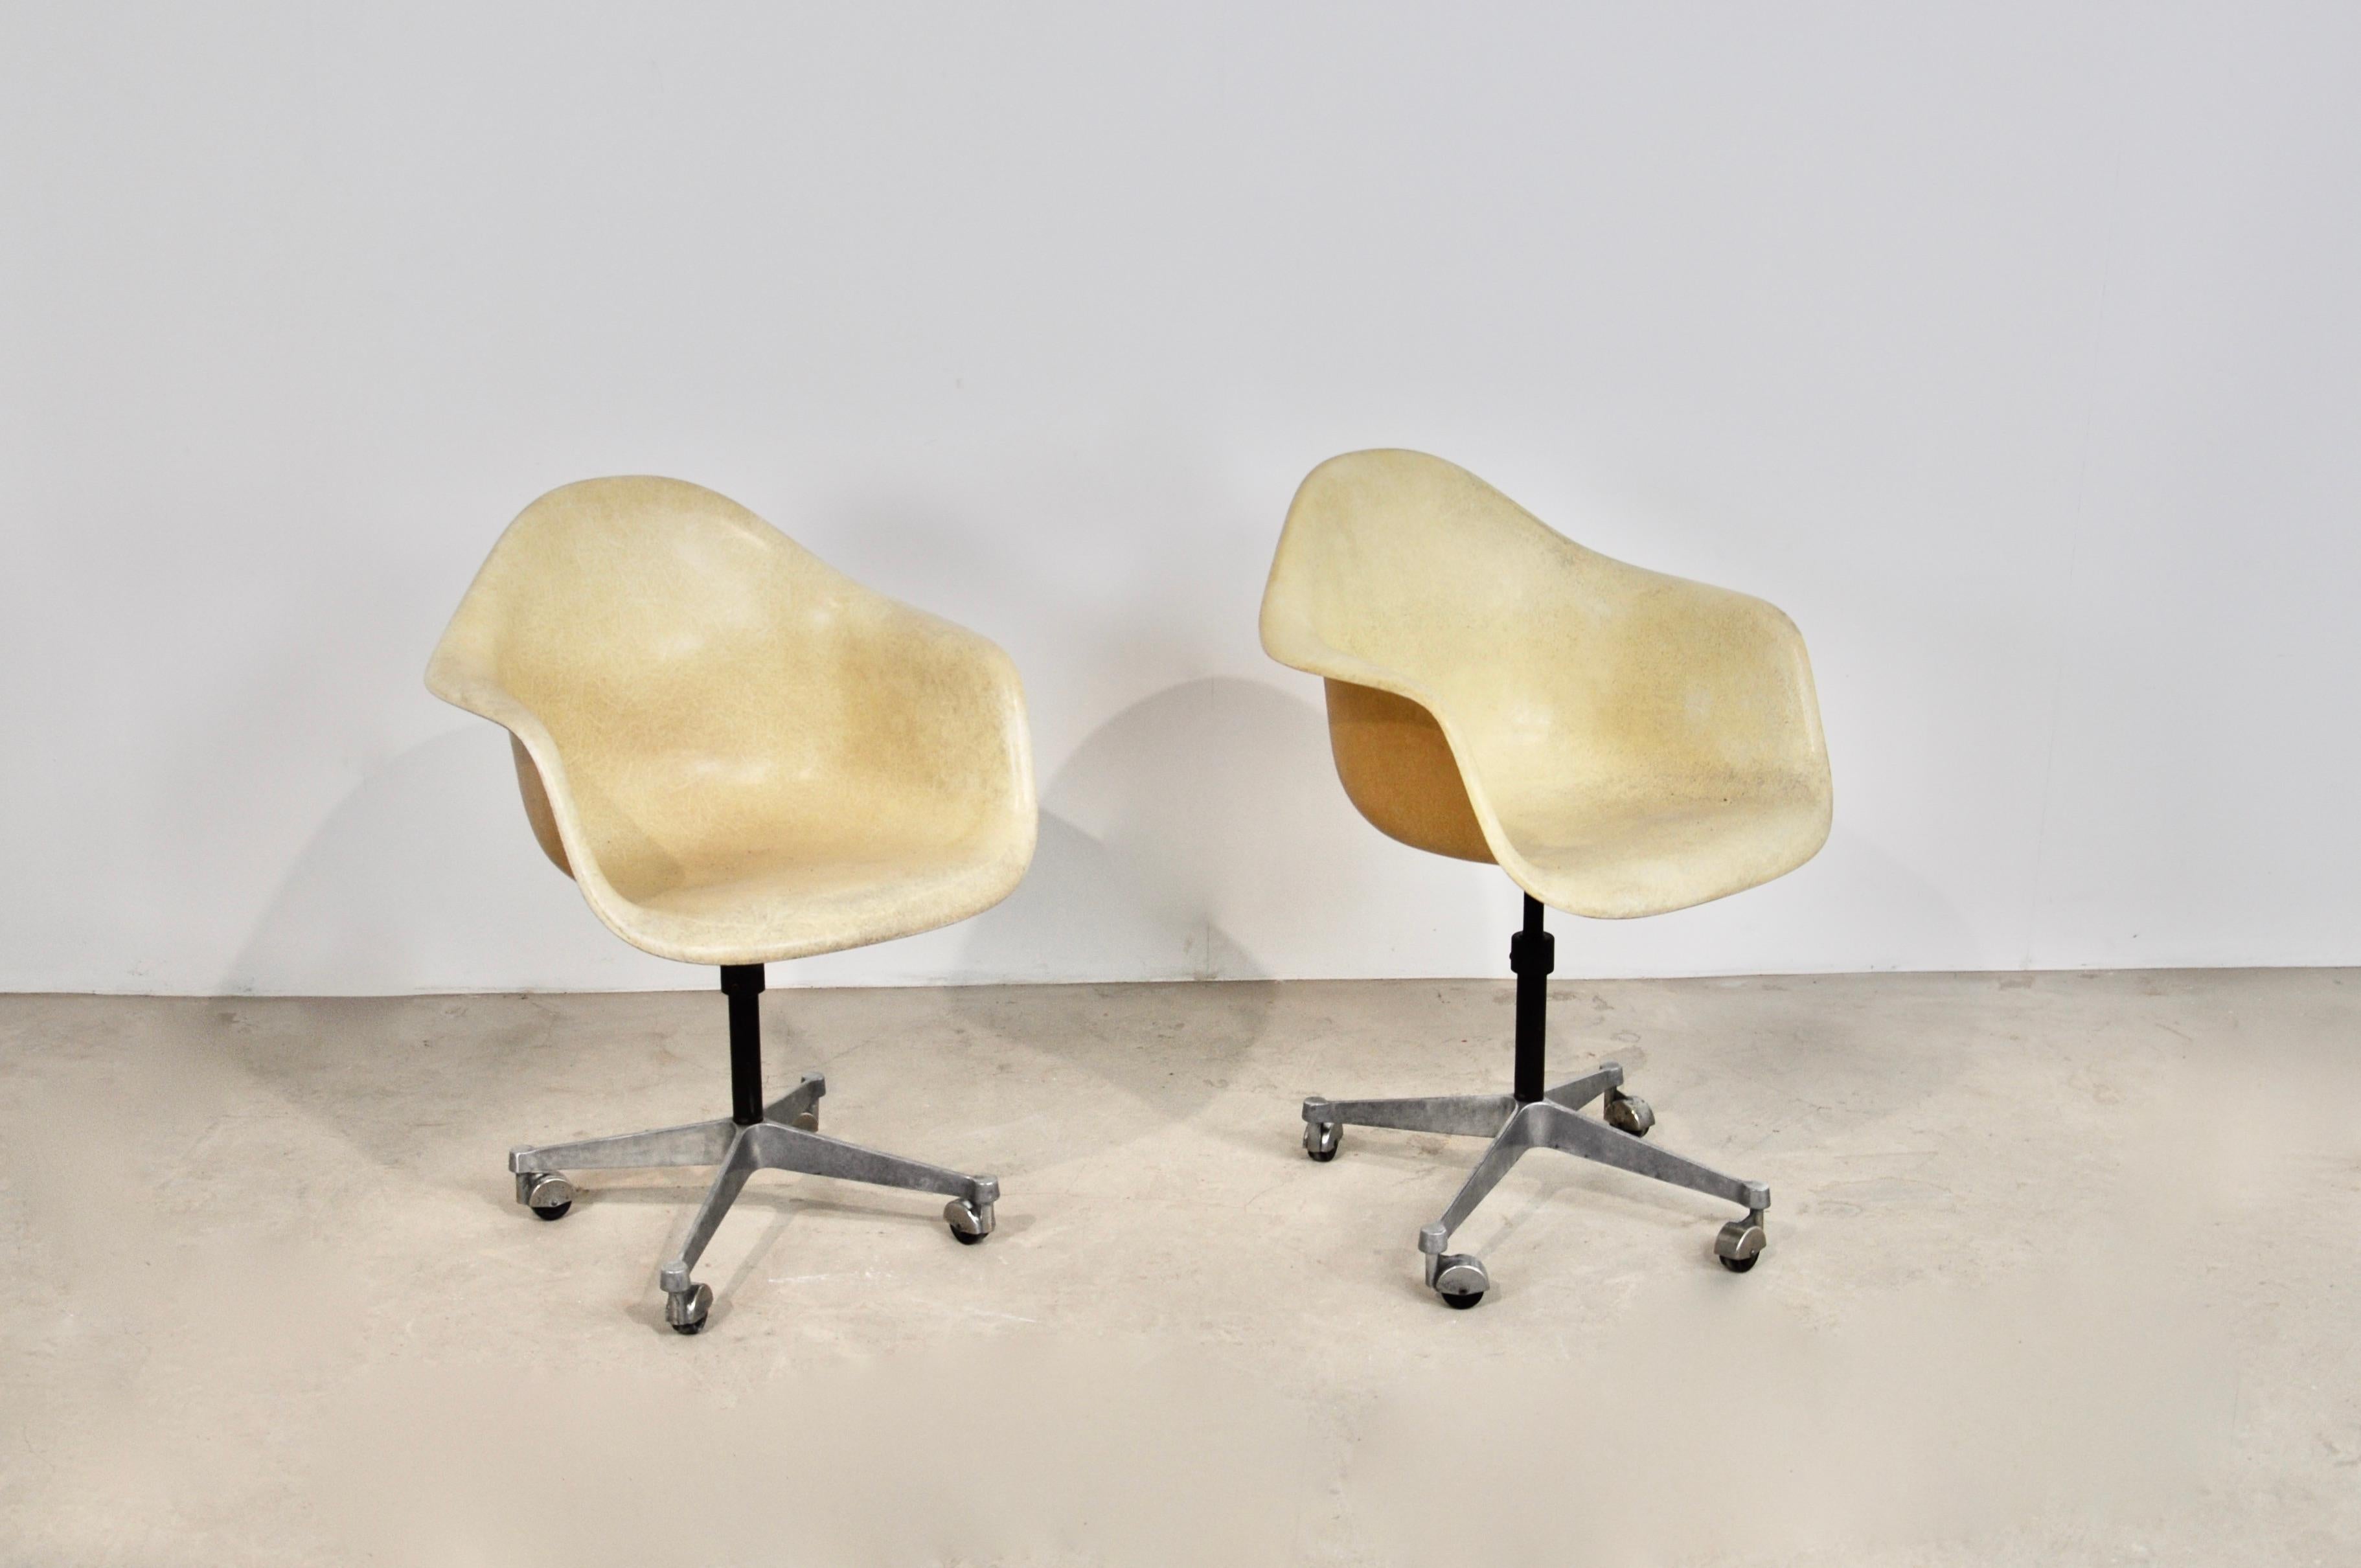 Pair of swivel chairs on casters in metal and fiberglass. Wear due to time and age of the chairs (see photo) 
Adjustable seat height.